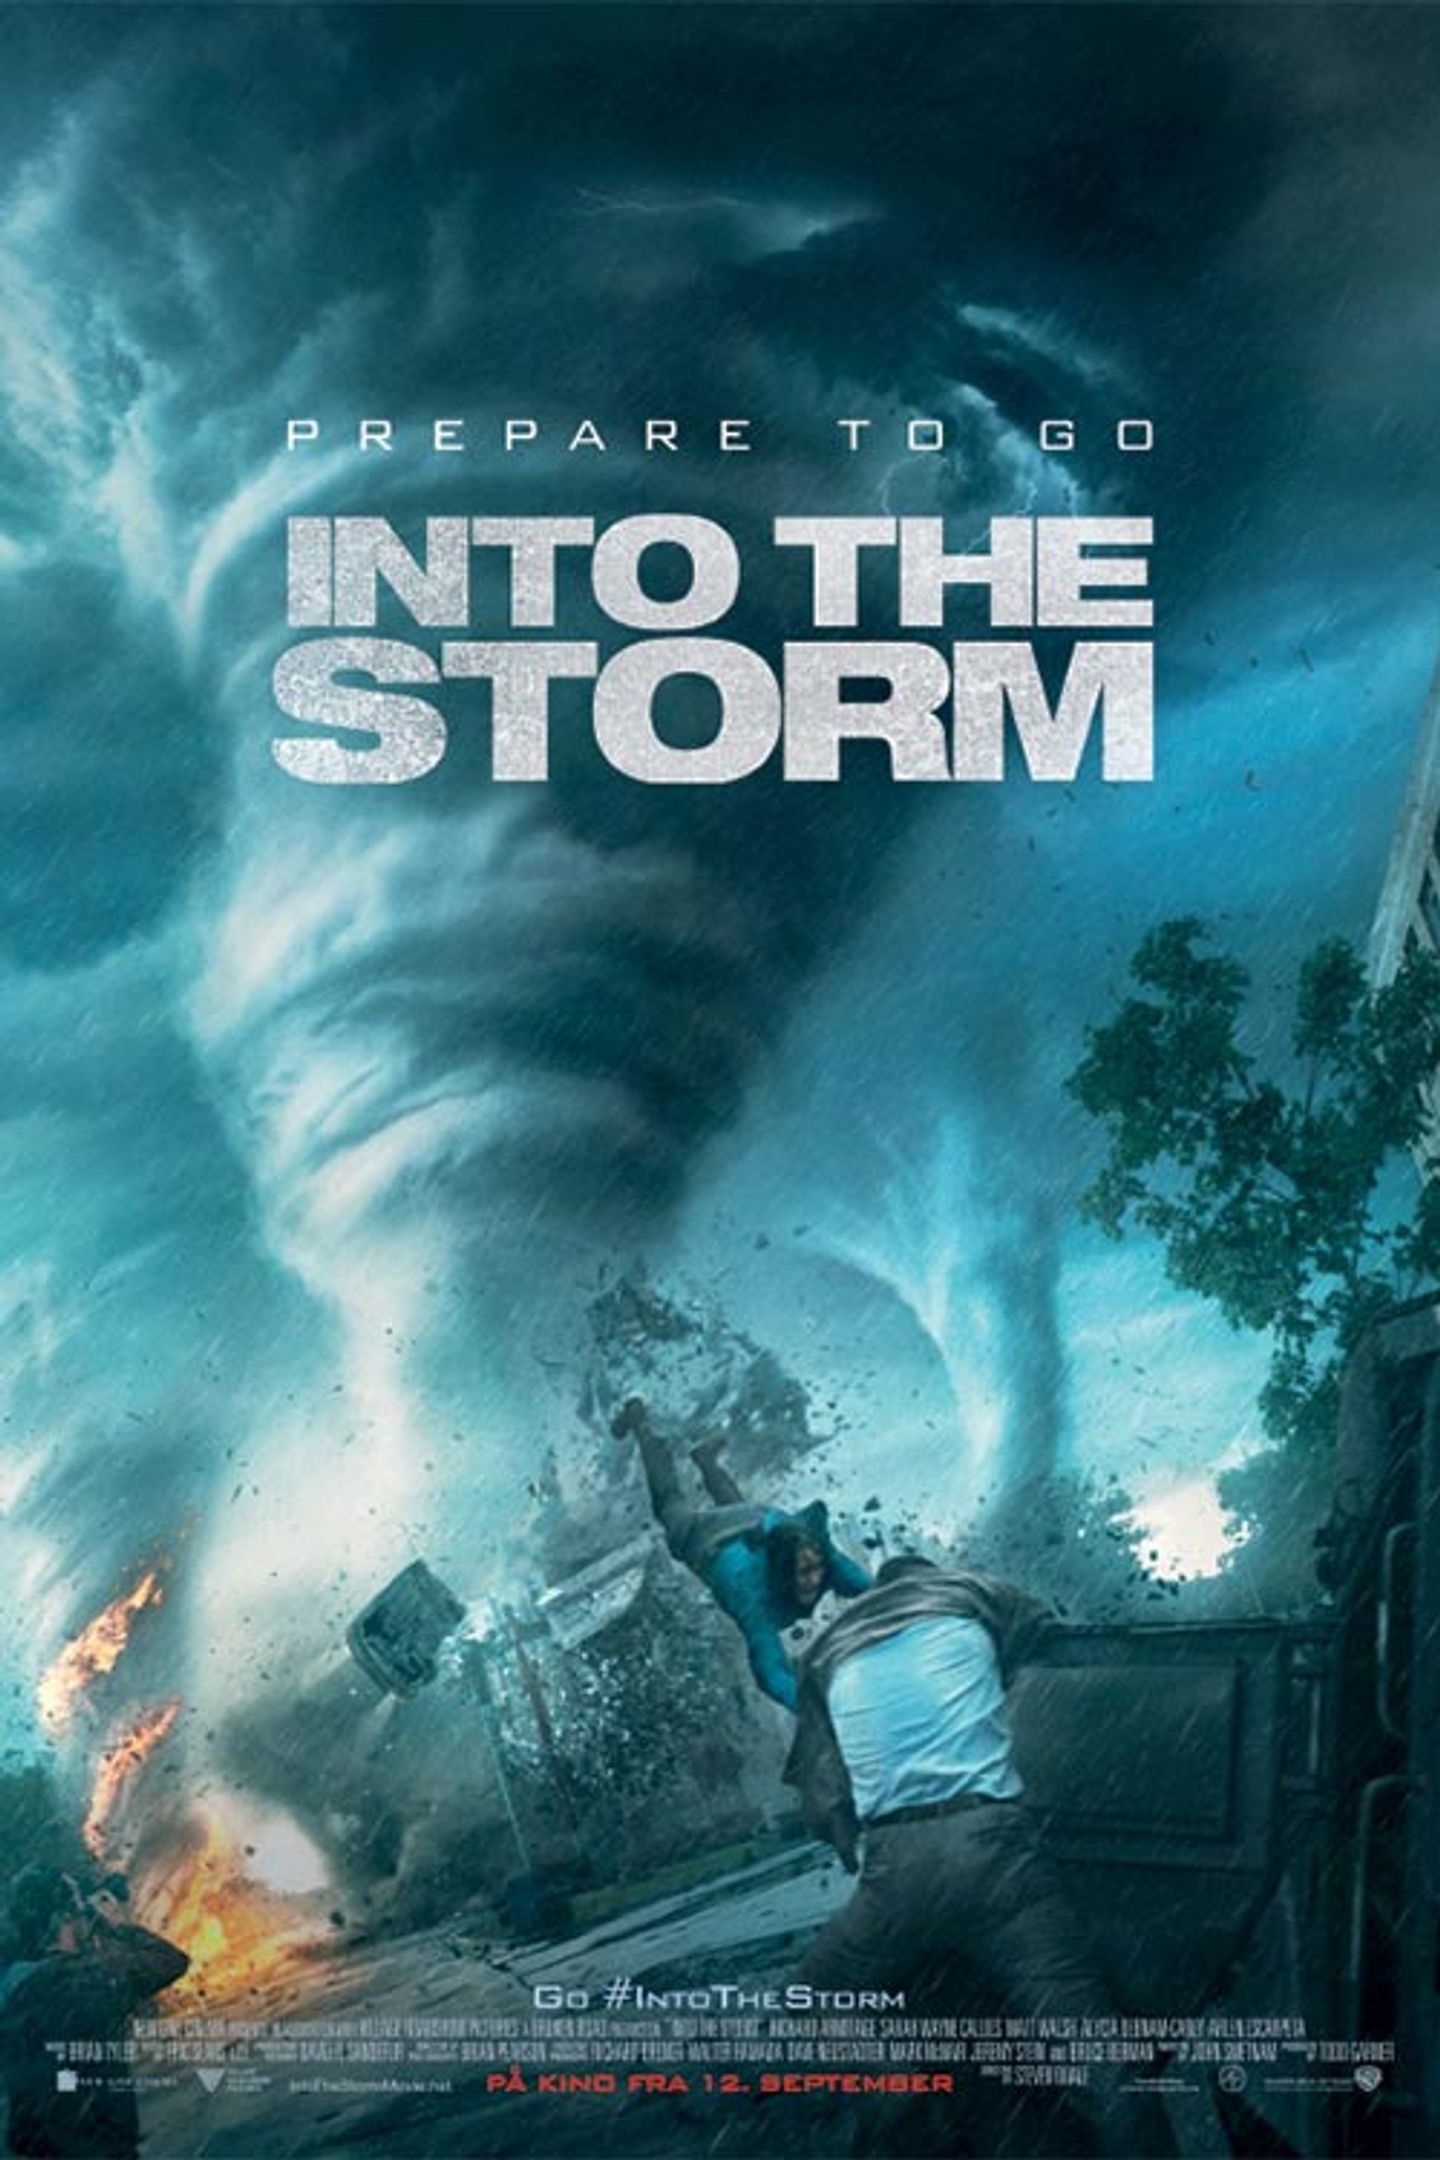 Plakat for 'Into the Storm'